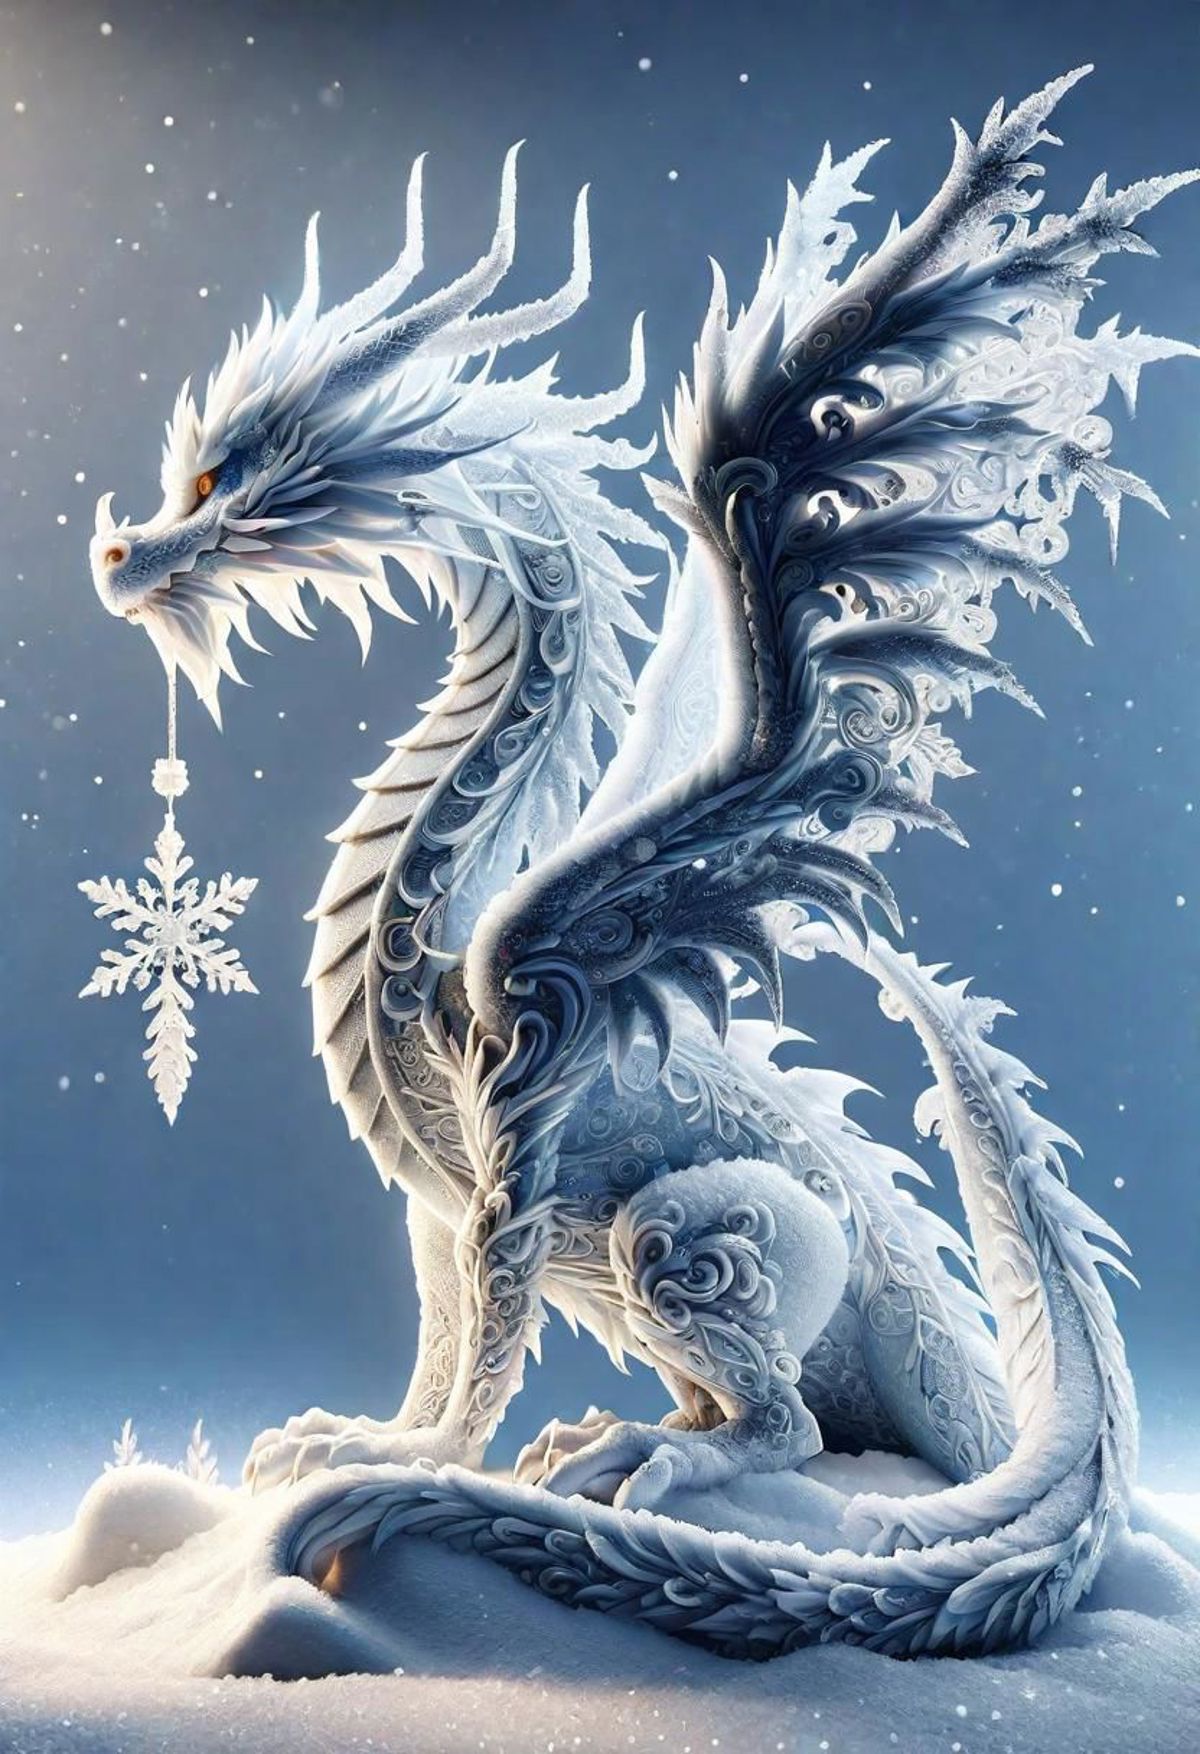 A beautiful blue and white dragon sitting on the snow.